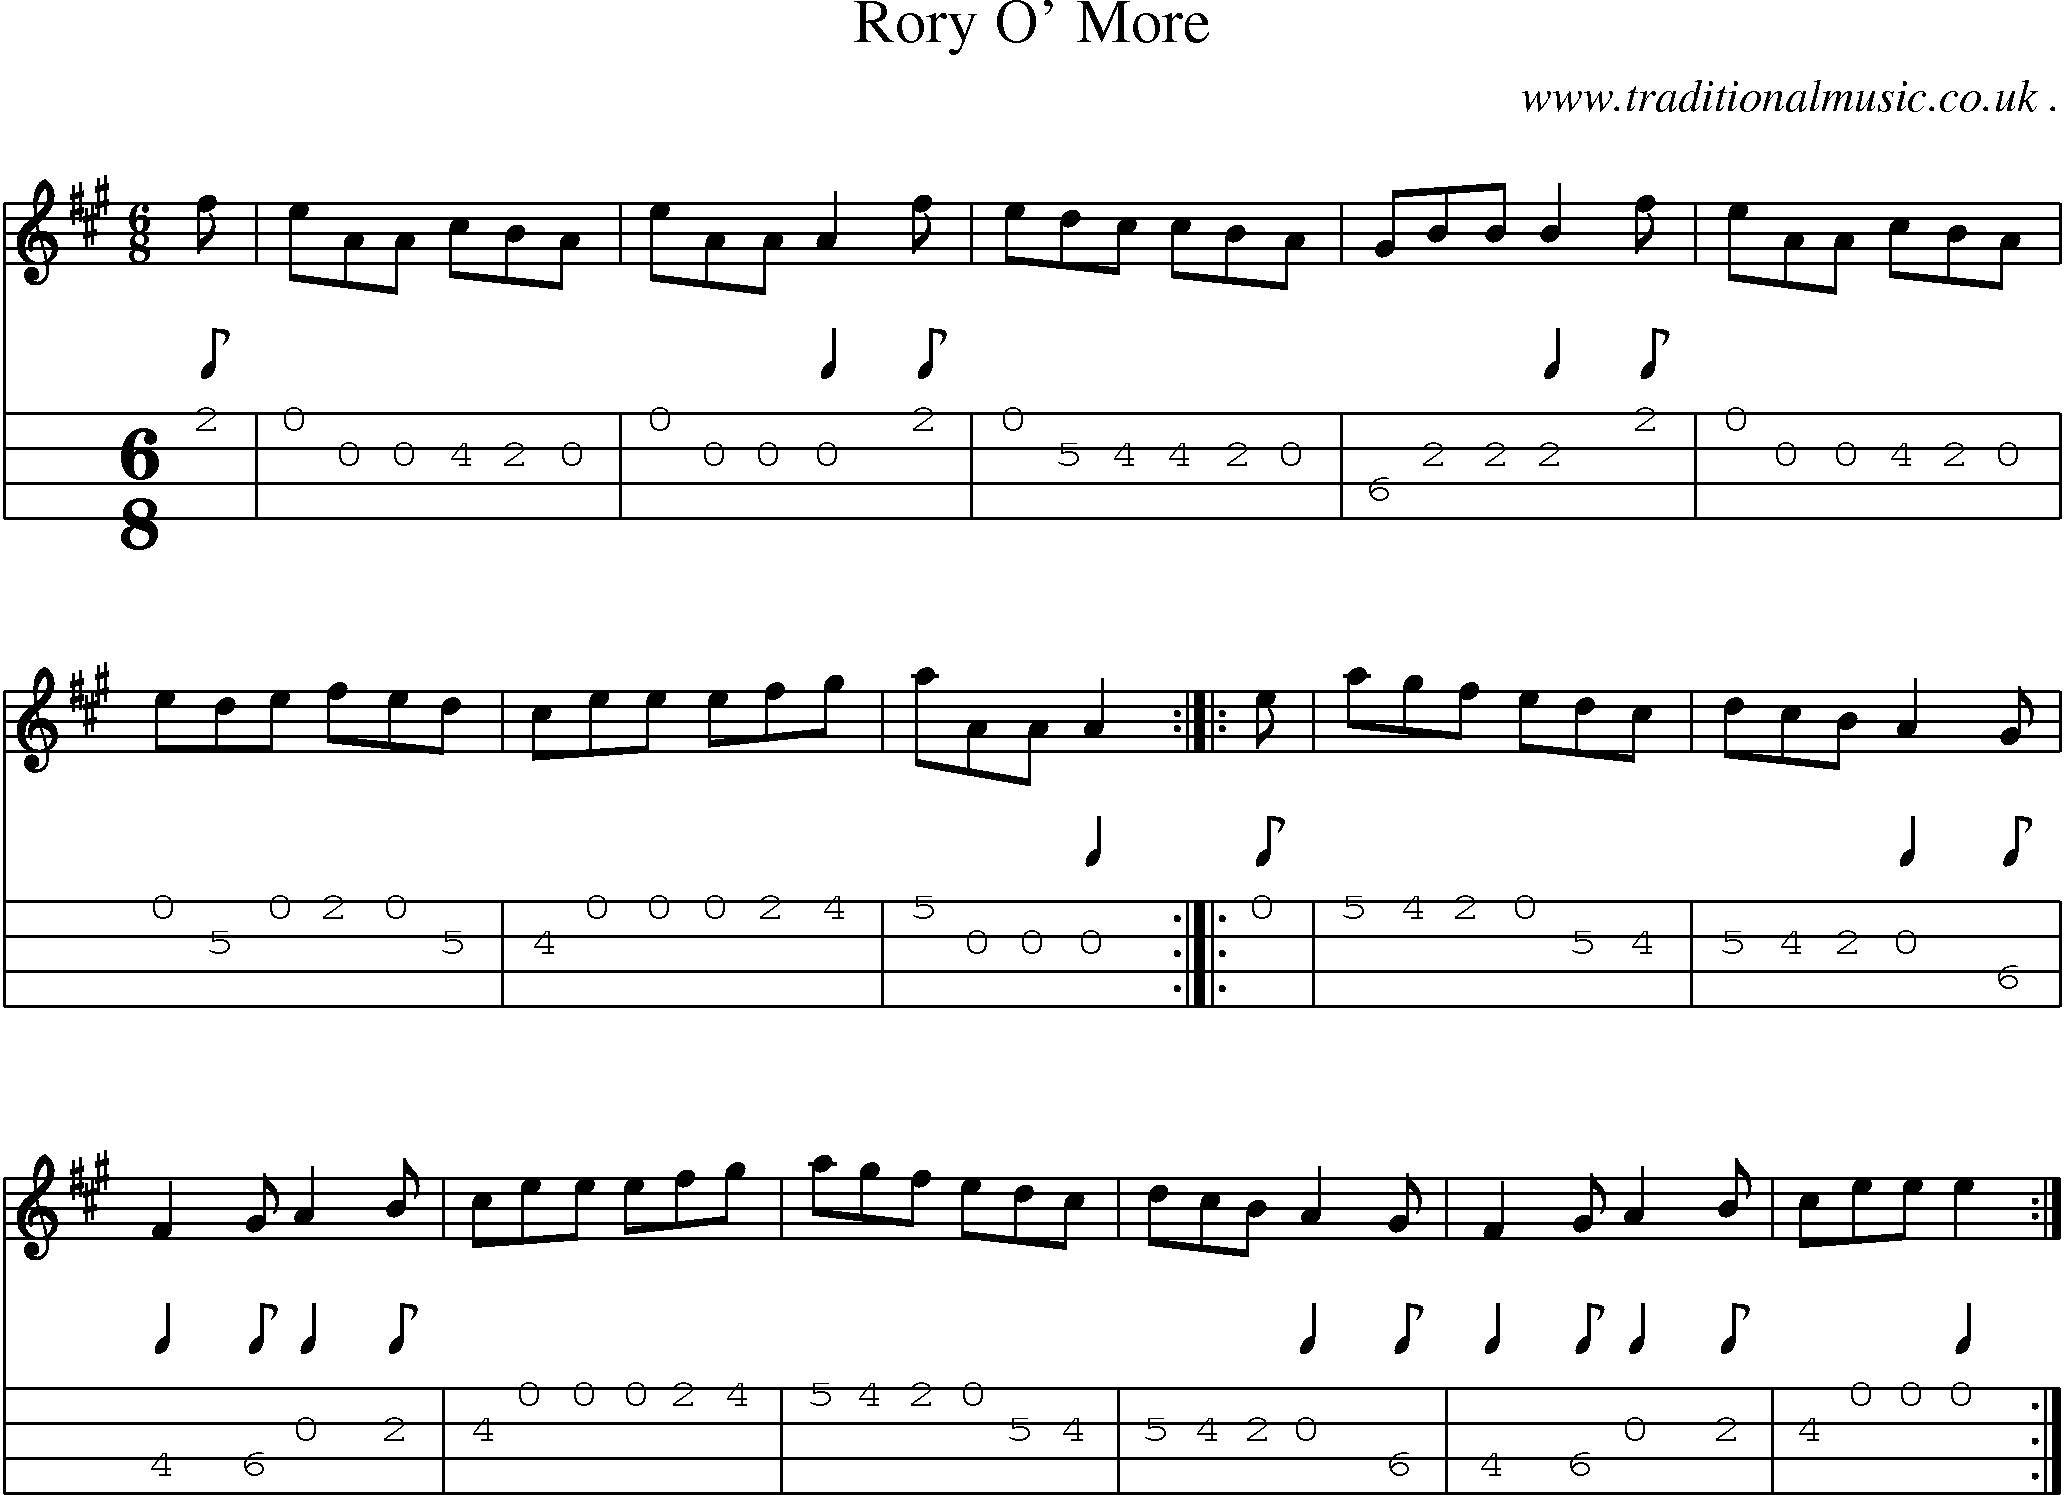 Sheet-music  score, Chords and Mandolin Tabs for Rory O More